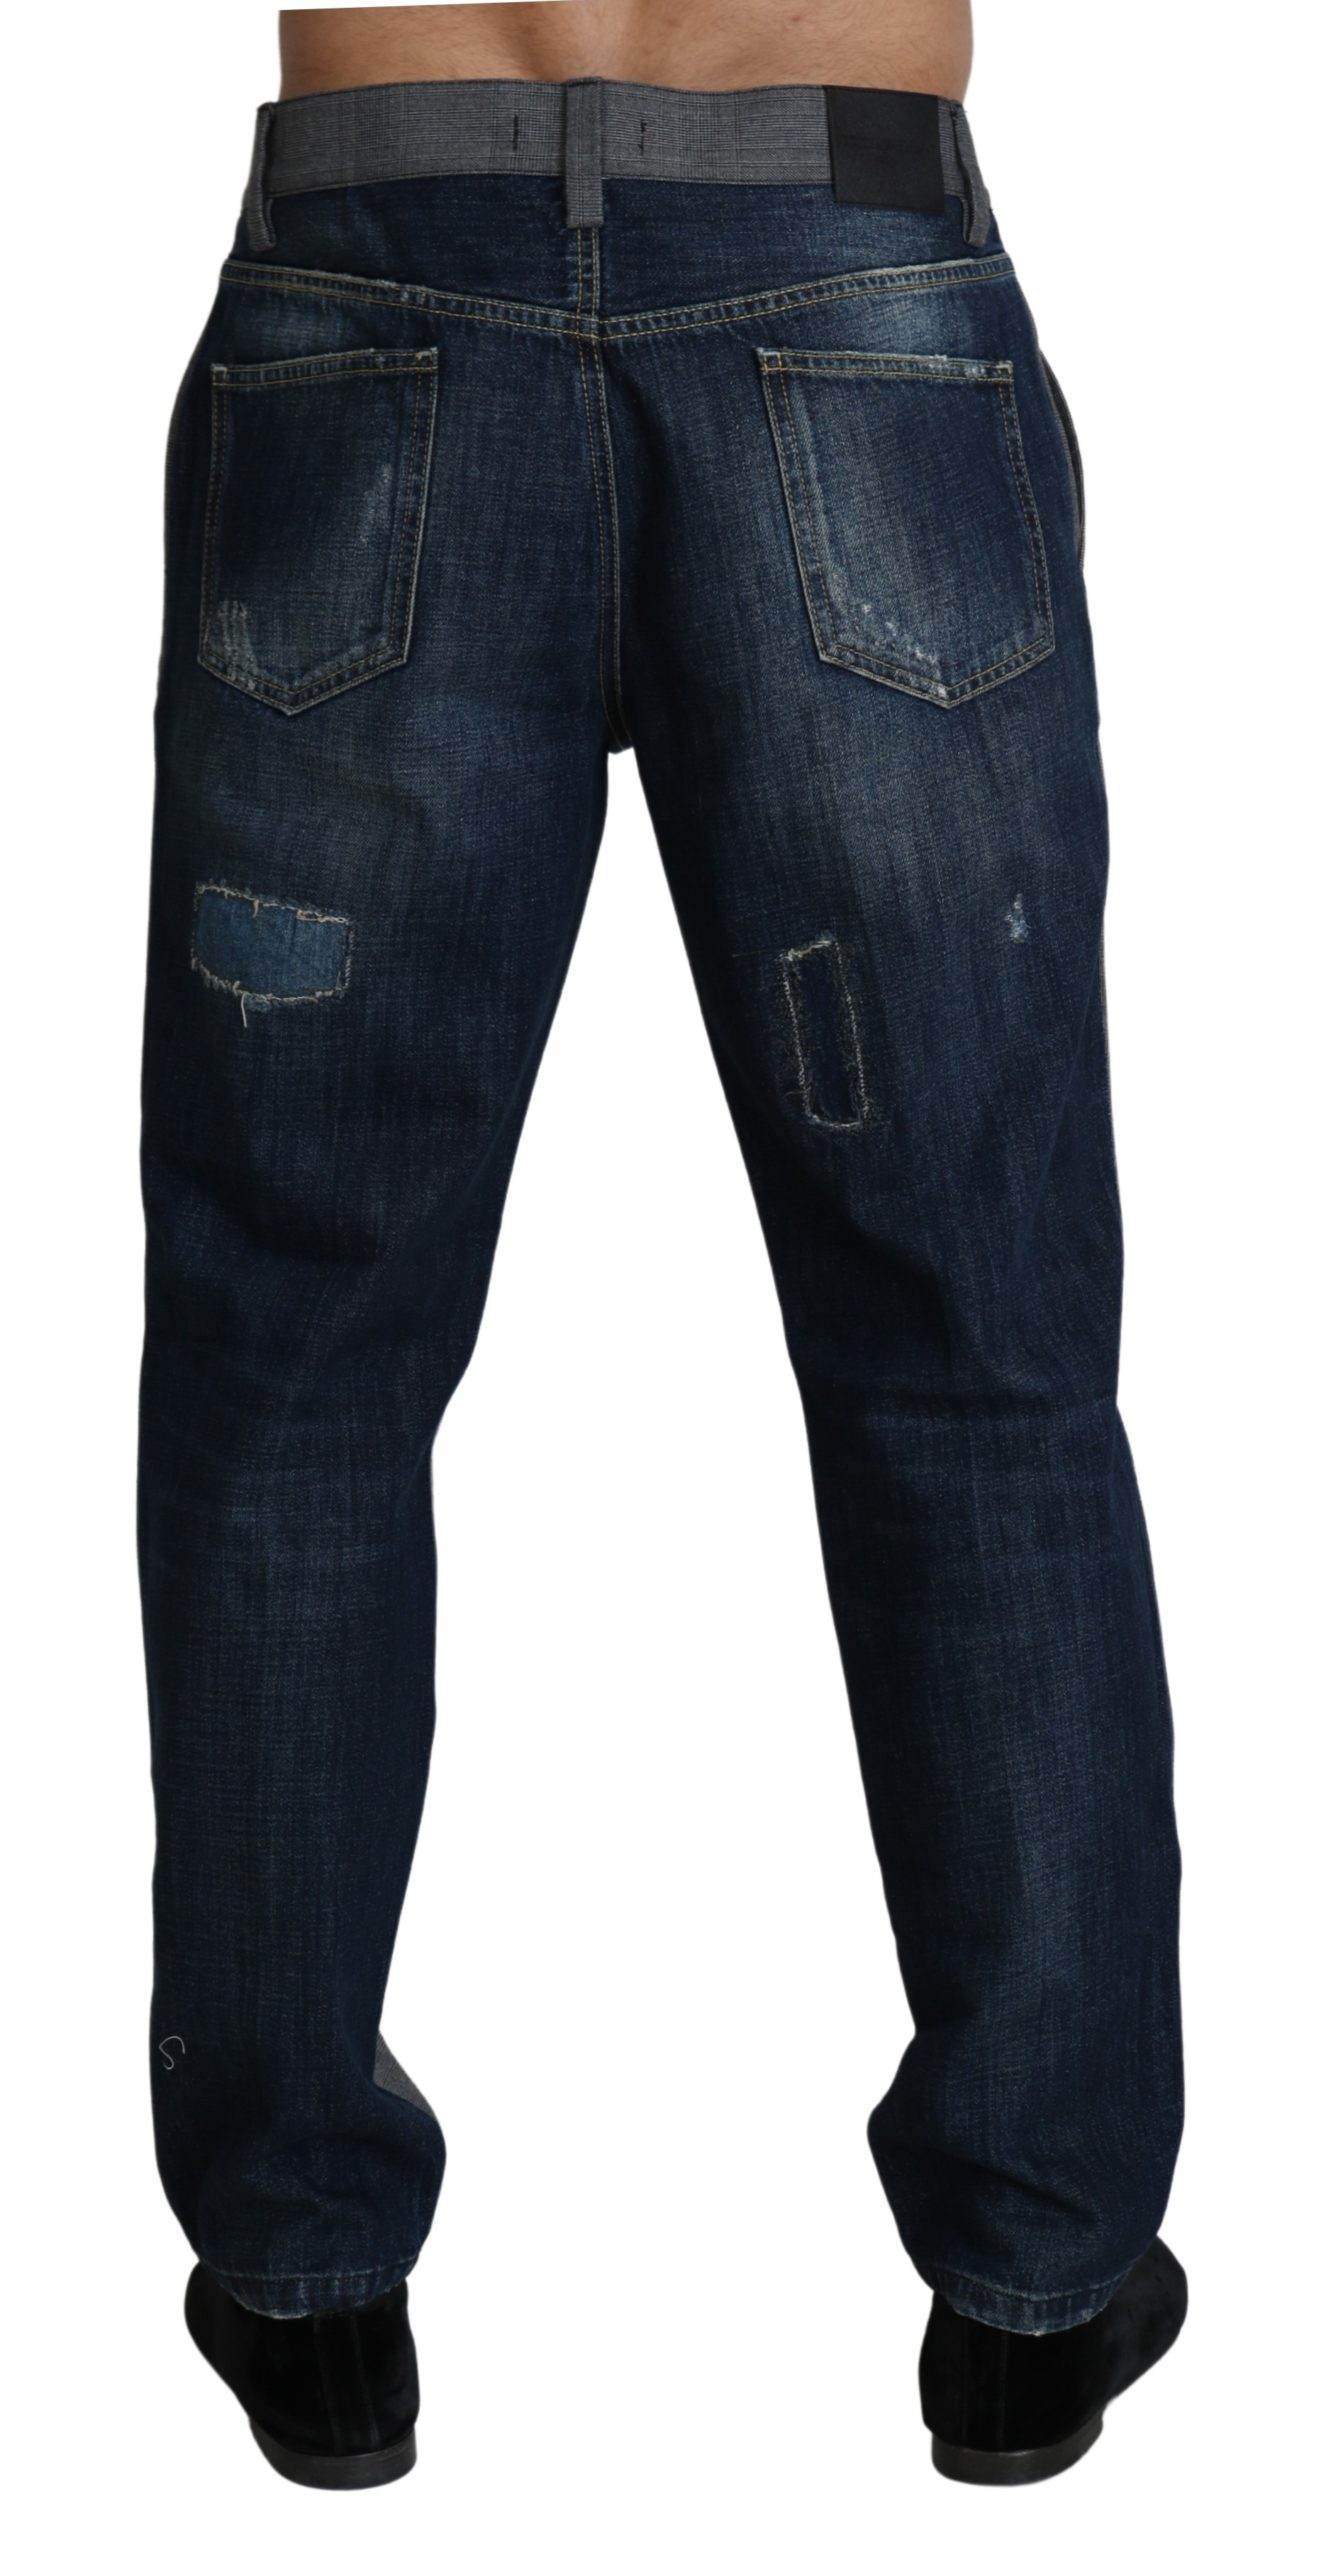 Dolce & Gabbana  Gray Dress Blue Denim Trousers Cotton Pants #men, Brand_Dolce & Gabbana, Catch, Dolce & Gabbana, feed-agegroup-adult, feed-color-gray, feed-gender-male, feed-size-IT50 | L, feed-size-IT52 | XL, feed-size-IT54 | XL, Gender_Men, Gray, IT50 | L, IT52 | XL, IT54 | XL, Jeans & Pants - Men - Clothing, Kogan, Men - New Arrivals at SEYMAYKA